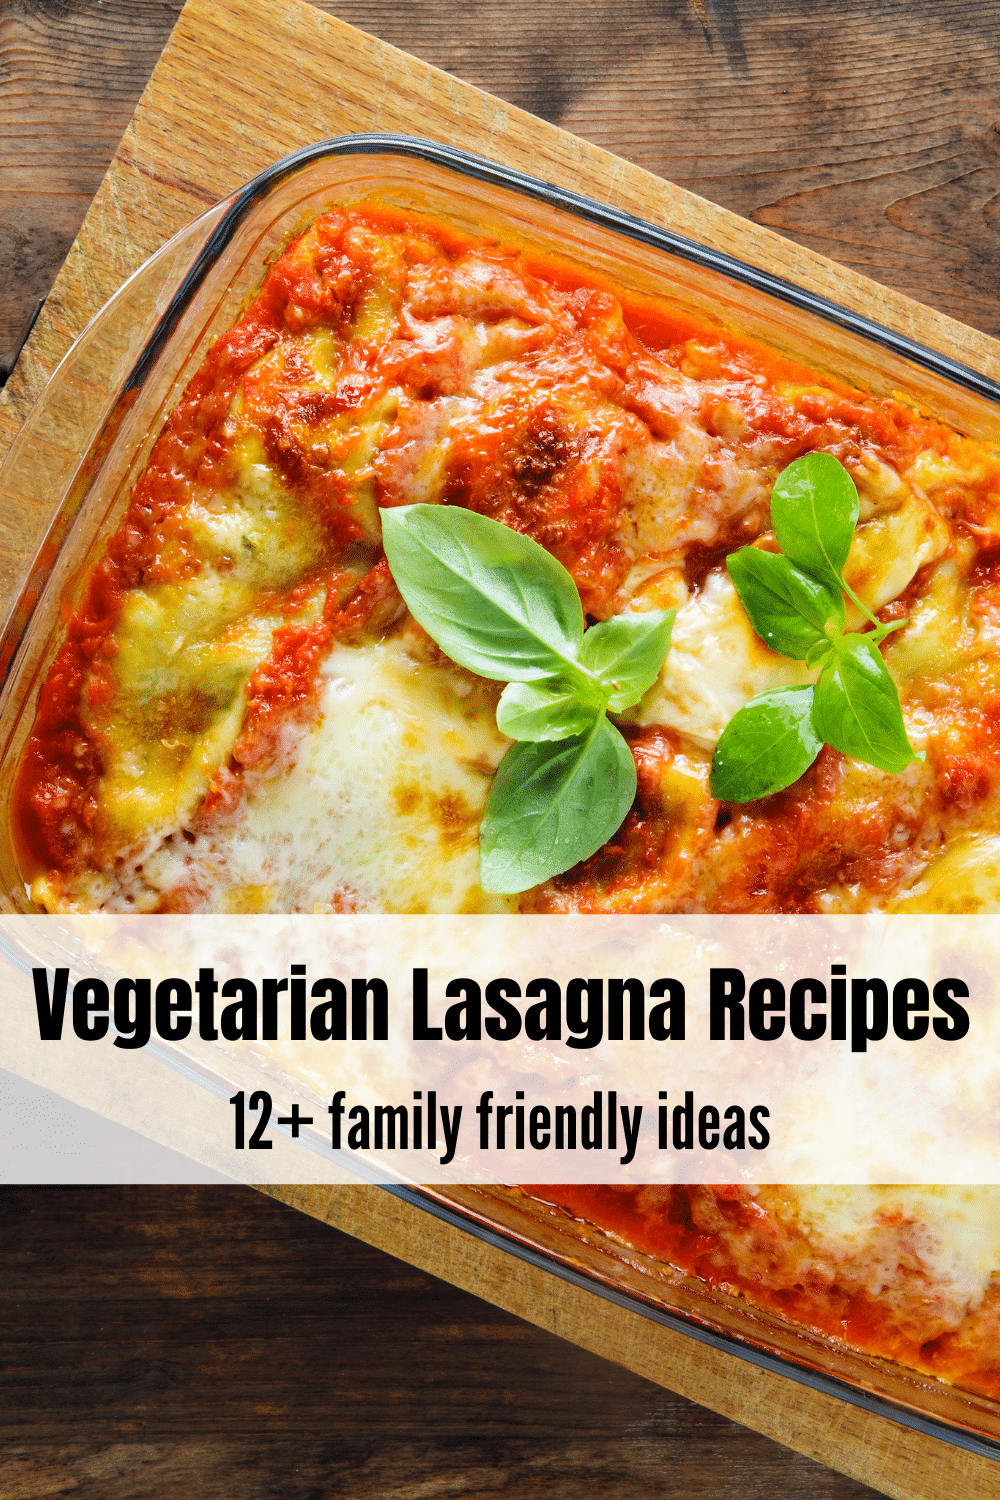 These vegetarian lasagna recipes are packed with flavor without the meat! Keep it simple with a delicious veggie lasagna for a healthy dinner. Read on for more than a dozen quick and easy vegetarian lasagne recipes your family will love!